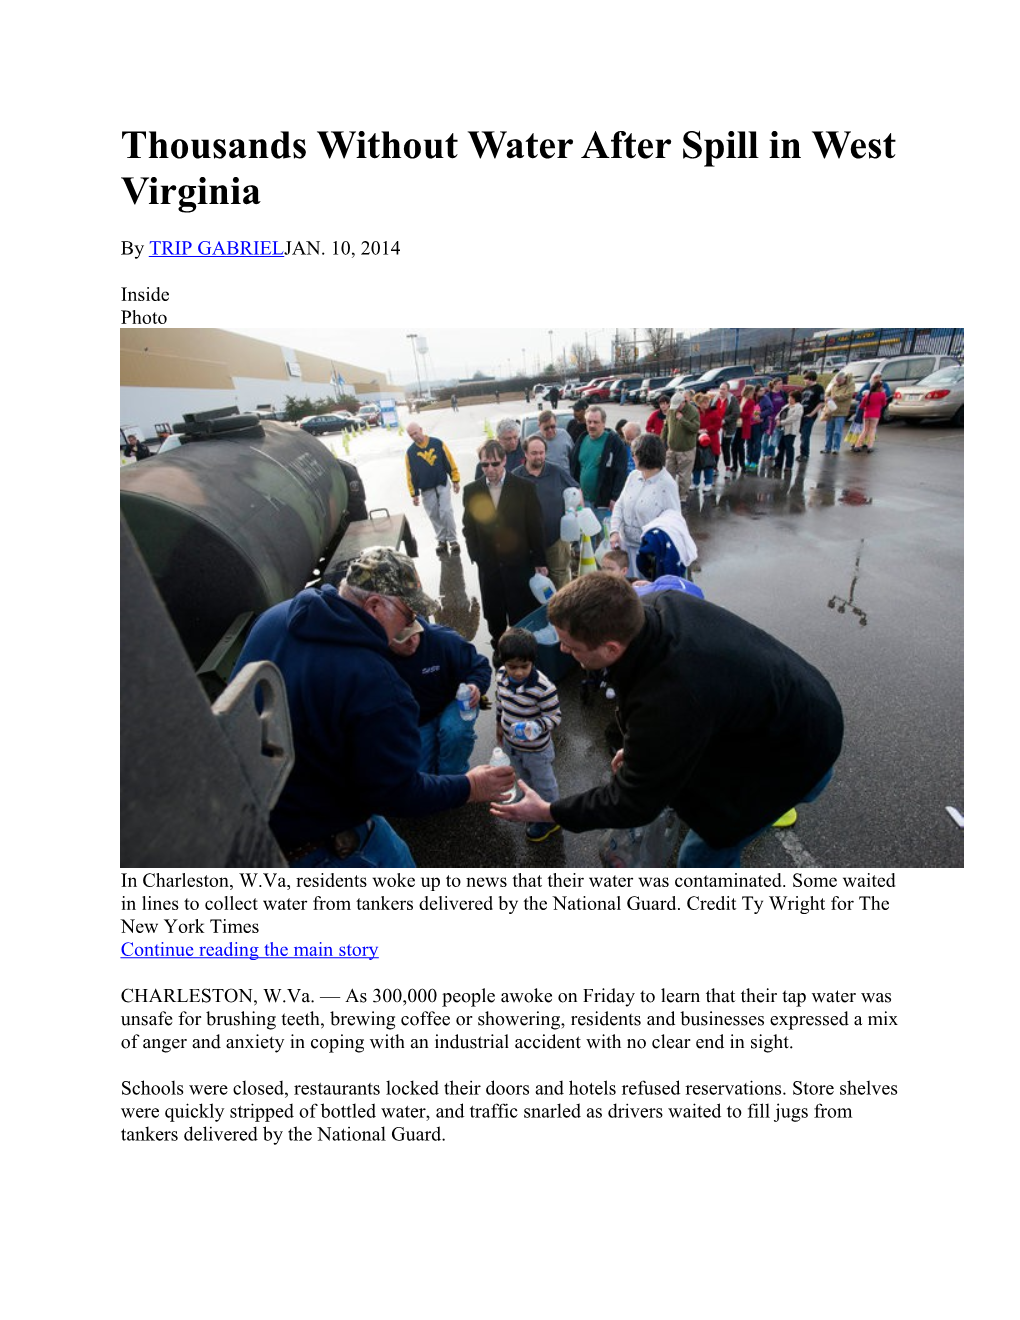 Thousands Without Water After Spill in West Virginia